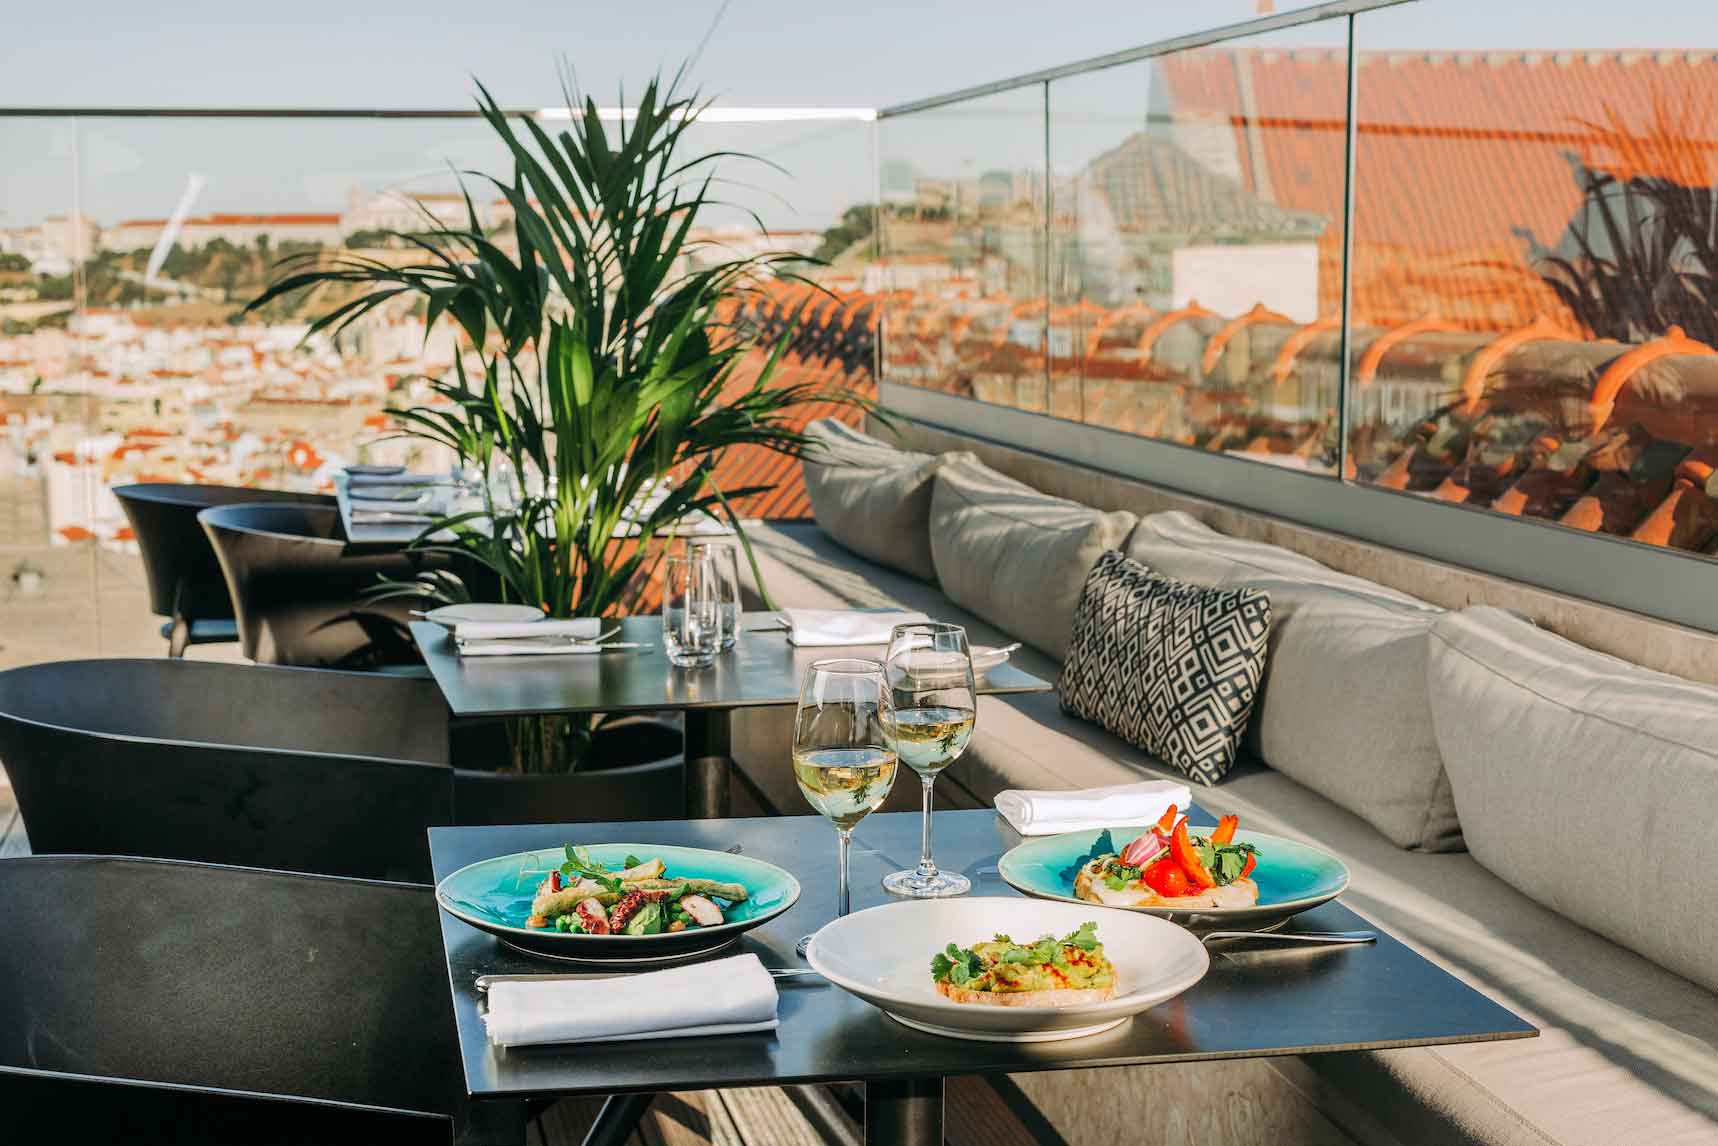 When it comes to Lisbon restaurants with a view, you can't get much better than Lumi, both as far as food and views go.